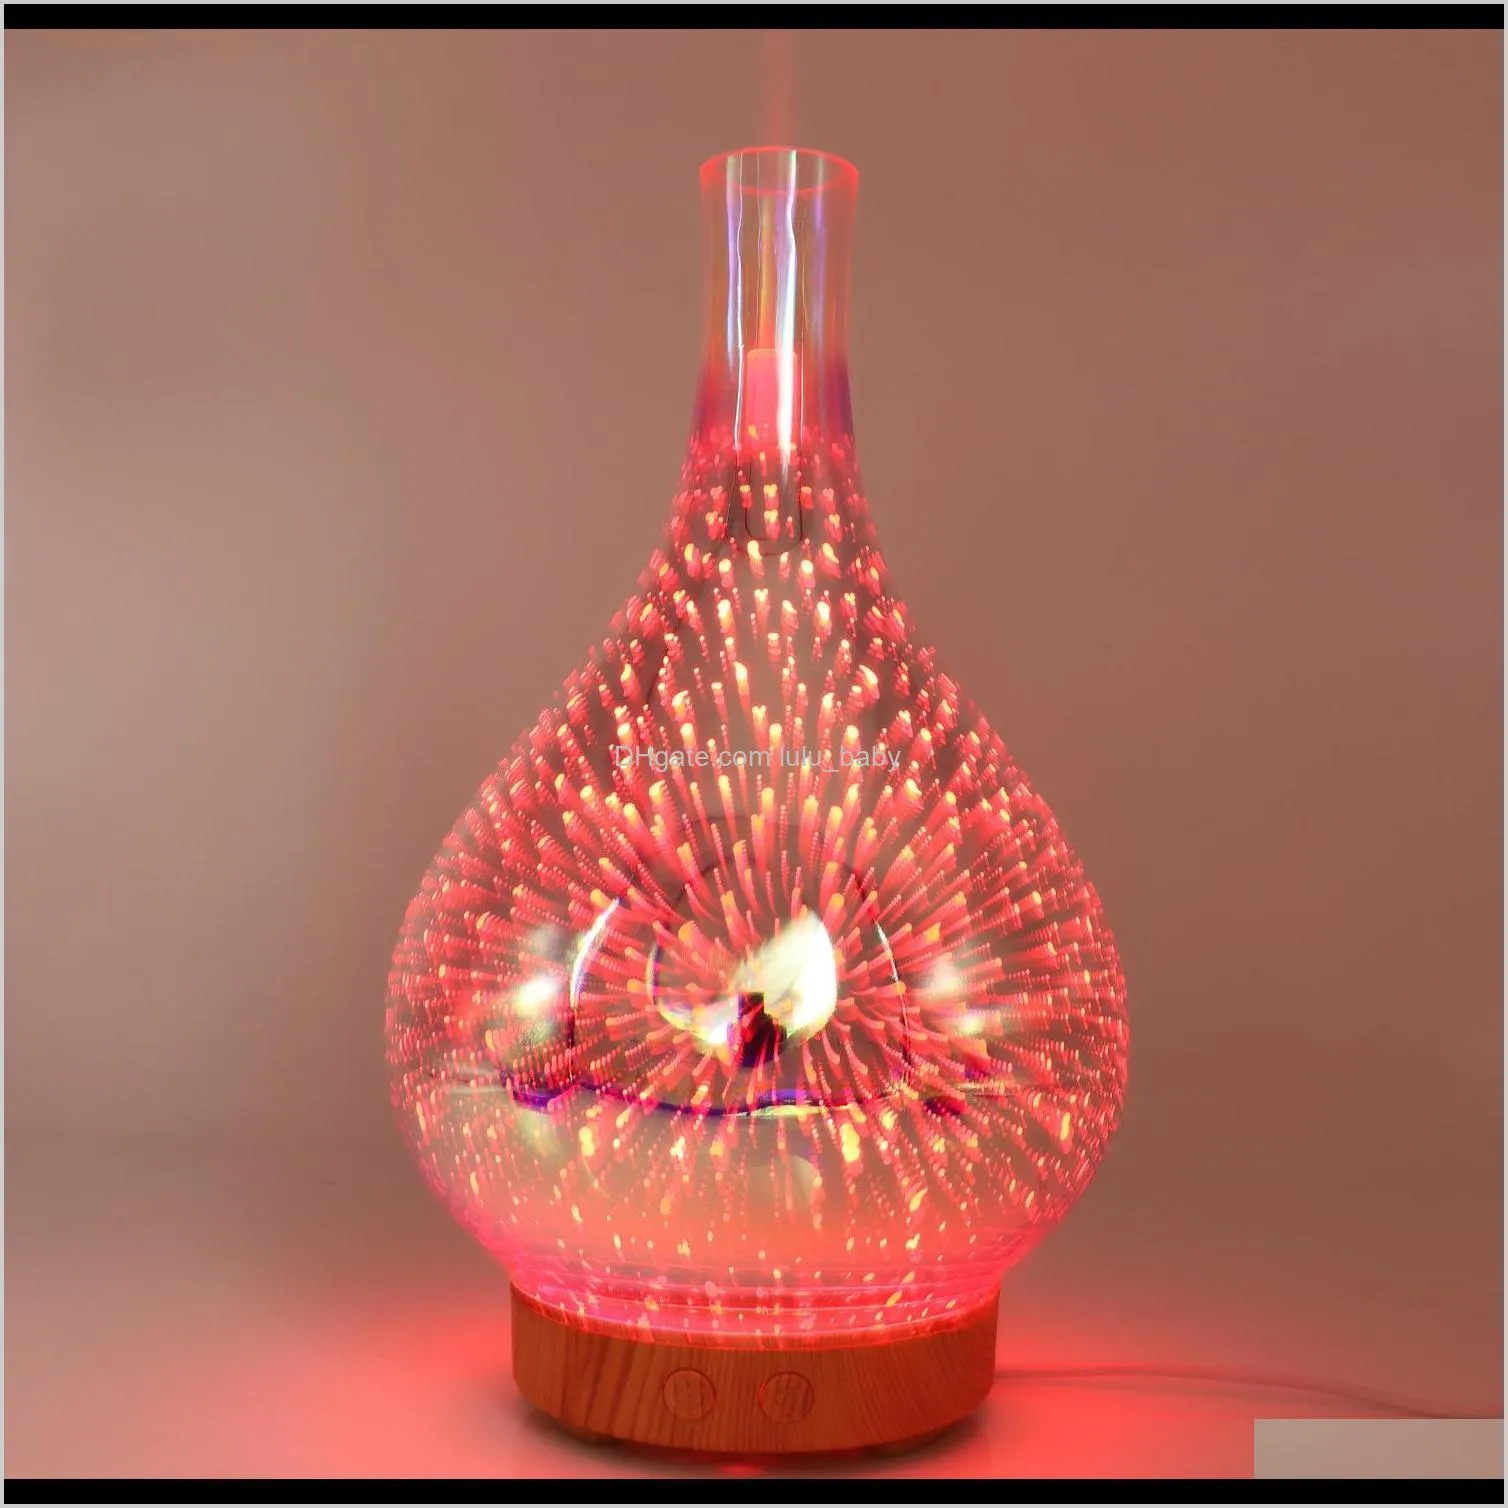 ultrasonic humidifier 3d fireworks glass vase shape air humidifier with led night light aroma oil diffuser mist maker